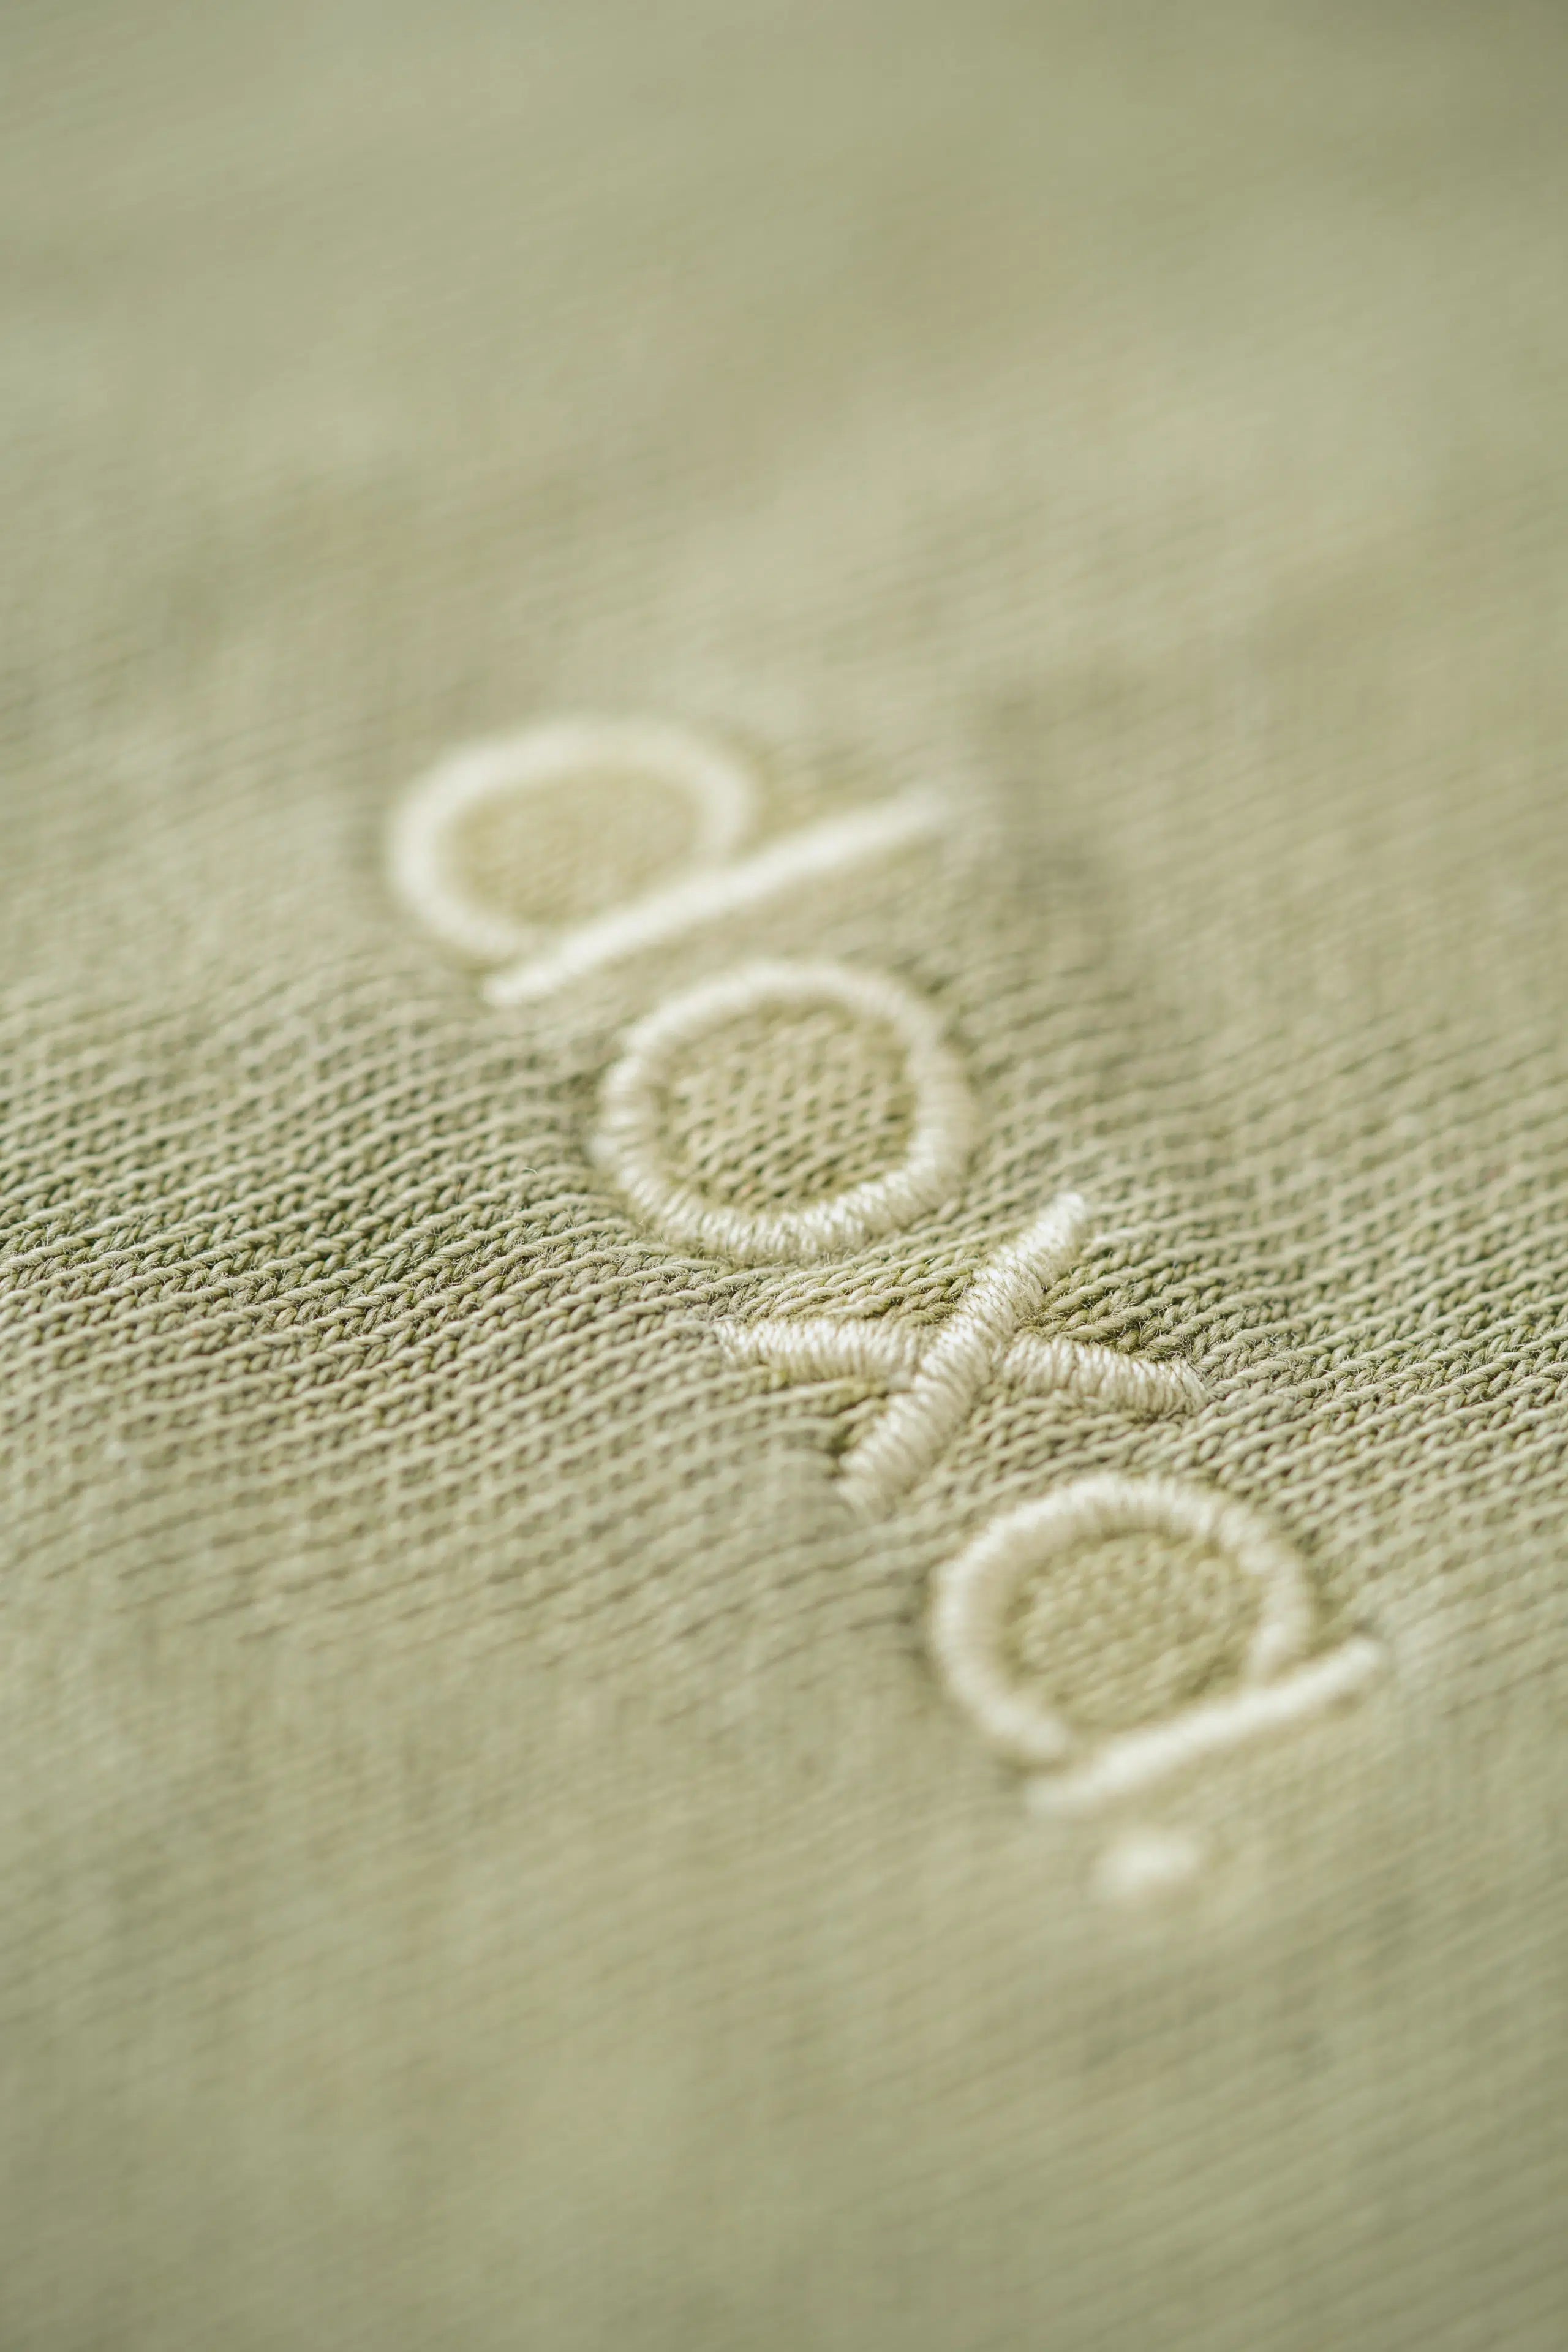 Sustainable Fashion Brand's DOXA embroidered logo and close up of the organic, mineral dyed fabric used for their Men's Hoodies